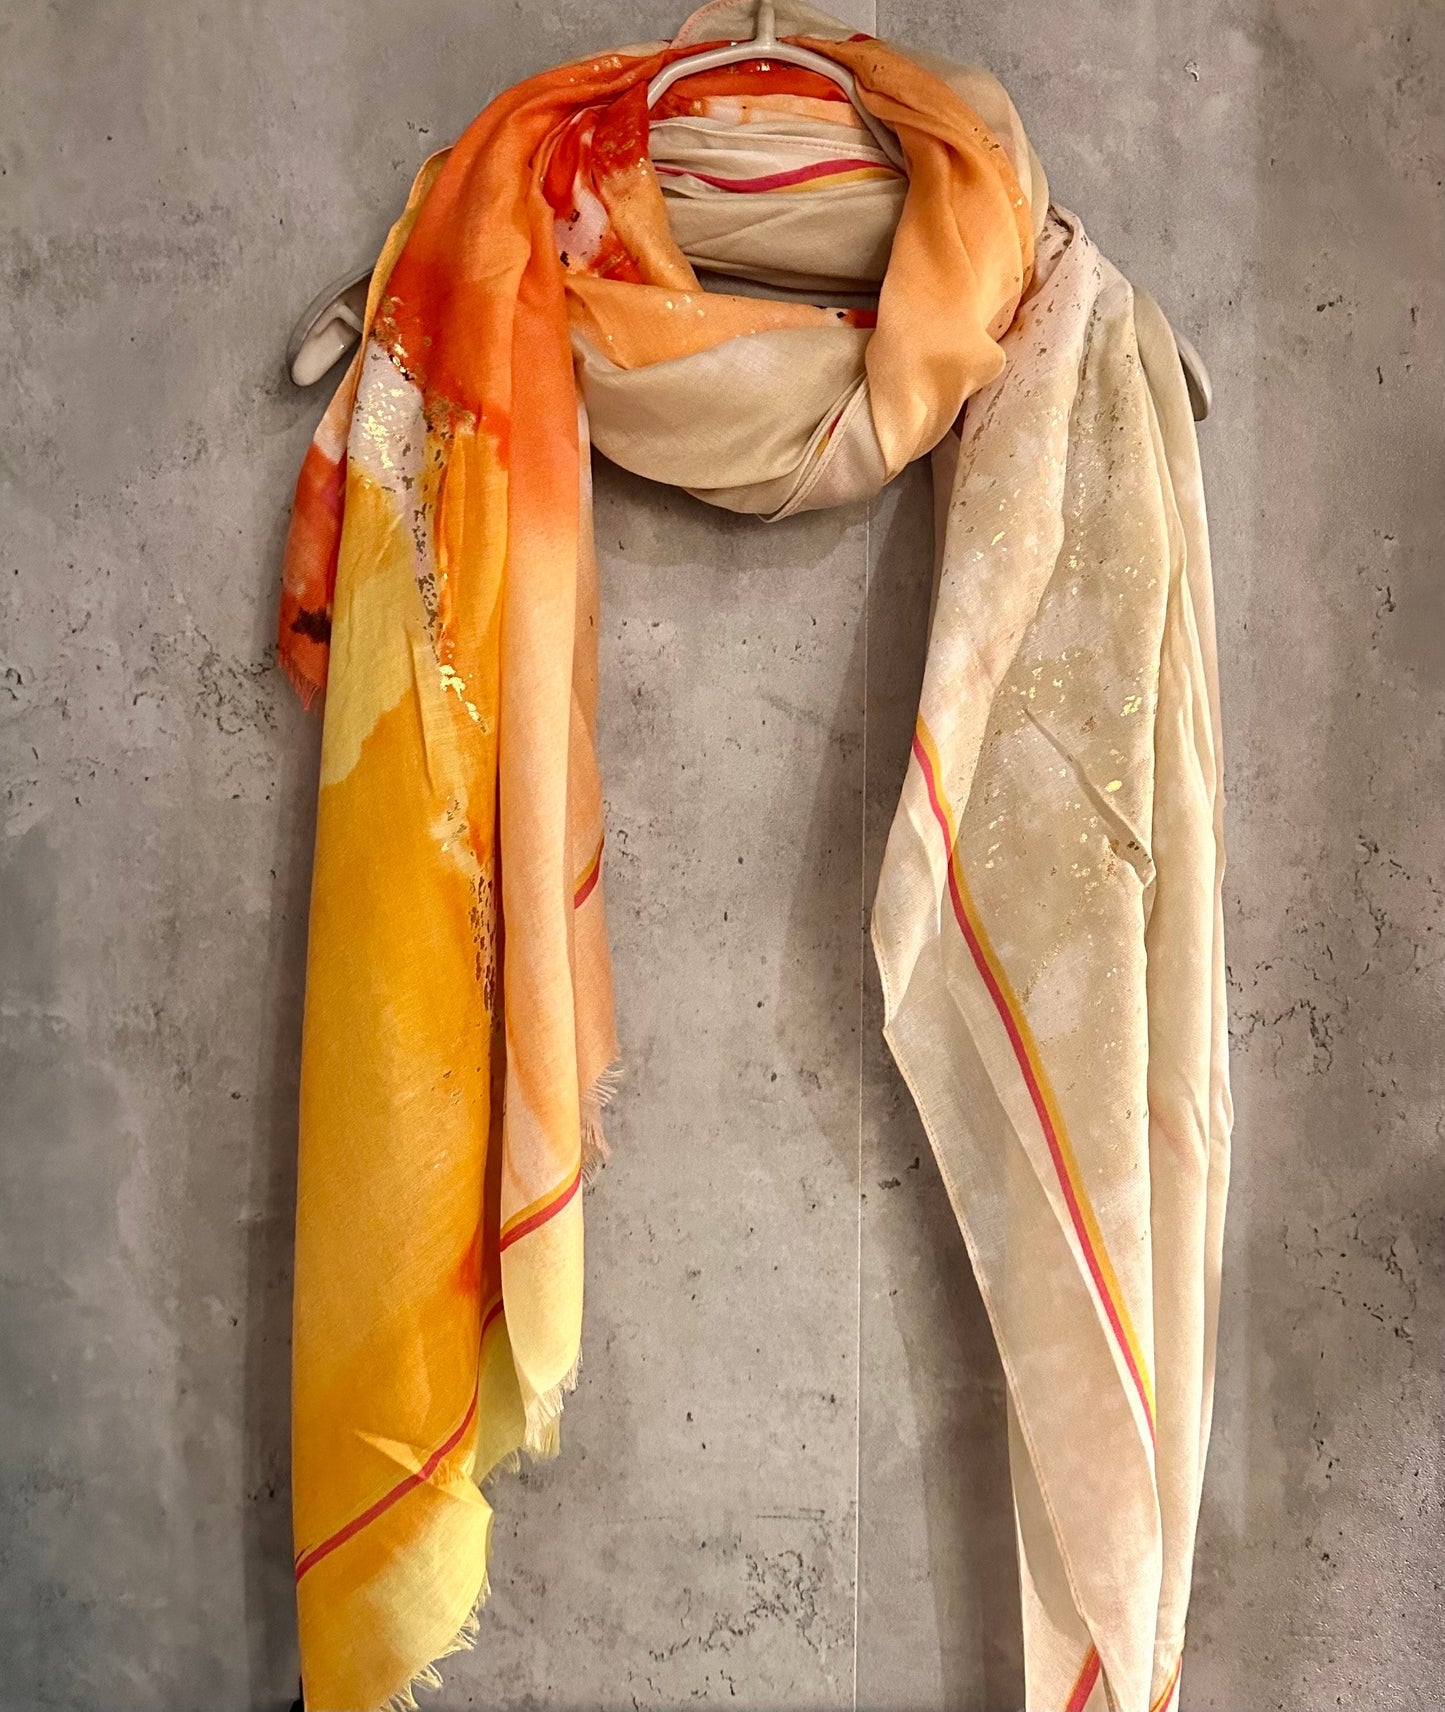 Watercolours Pattern Gold Dusk Orange Cotton Scarf/Summer Autumn Scarf/Scarf Women/Gift For Her Birthday Christmas/Gifts For Mum/UK Seller